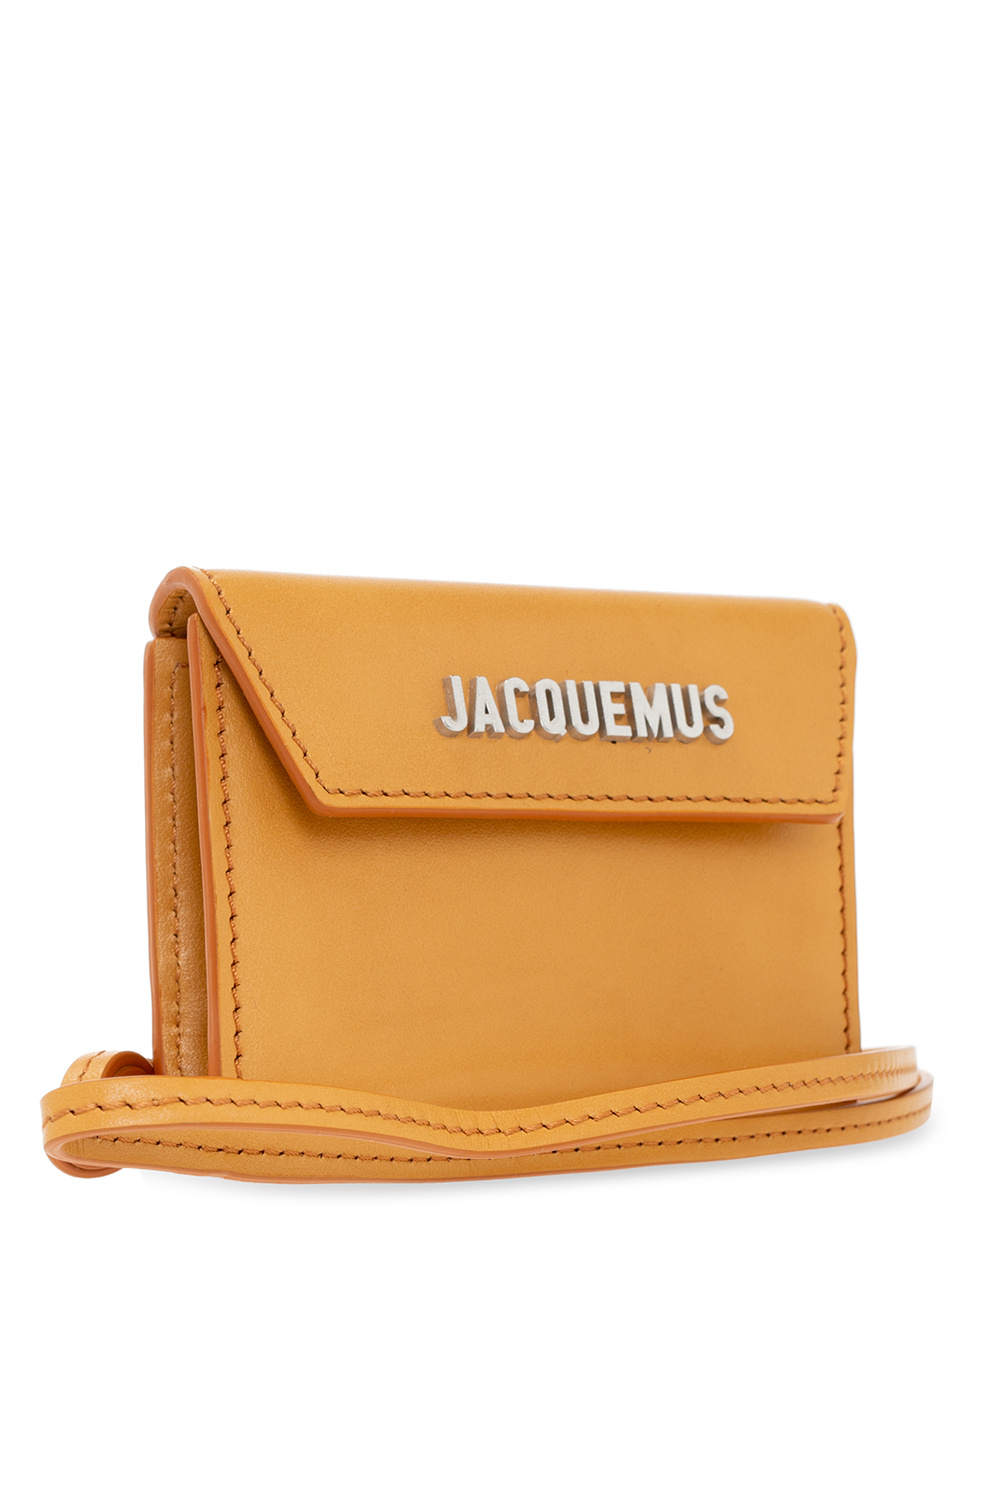 Jacquemus Download the updated version of the app